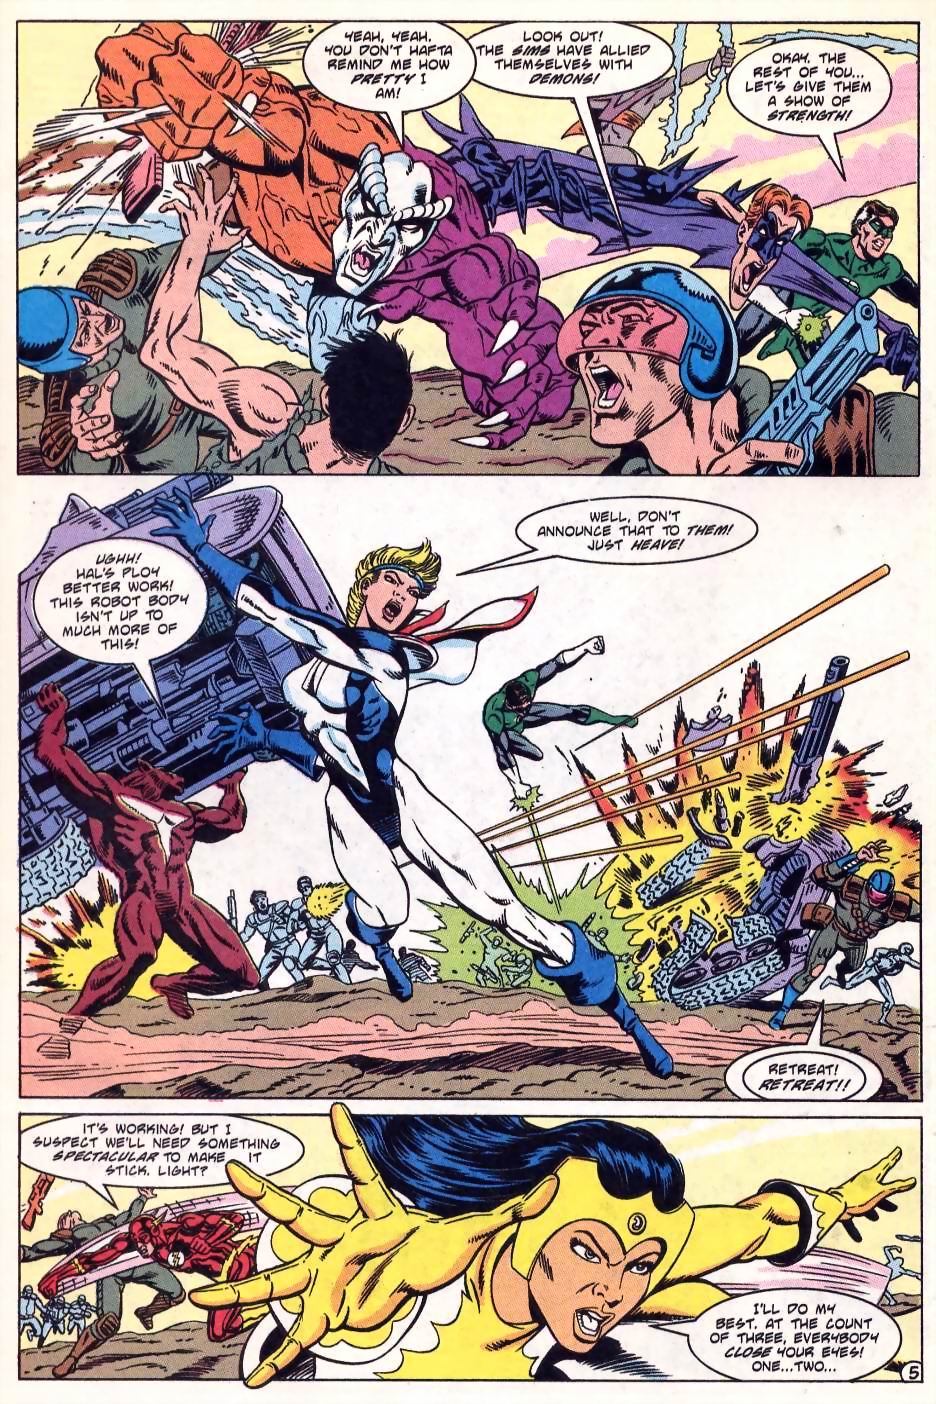 Justice League International (1993) 55 Page 6